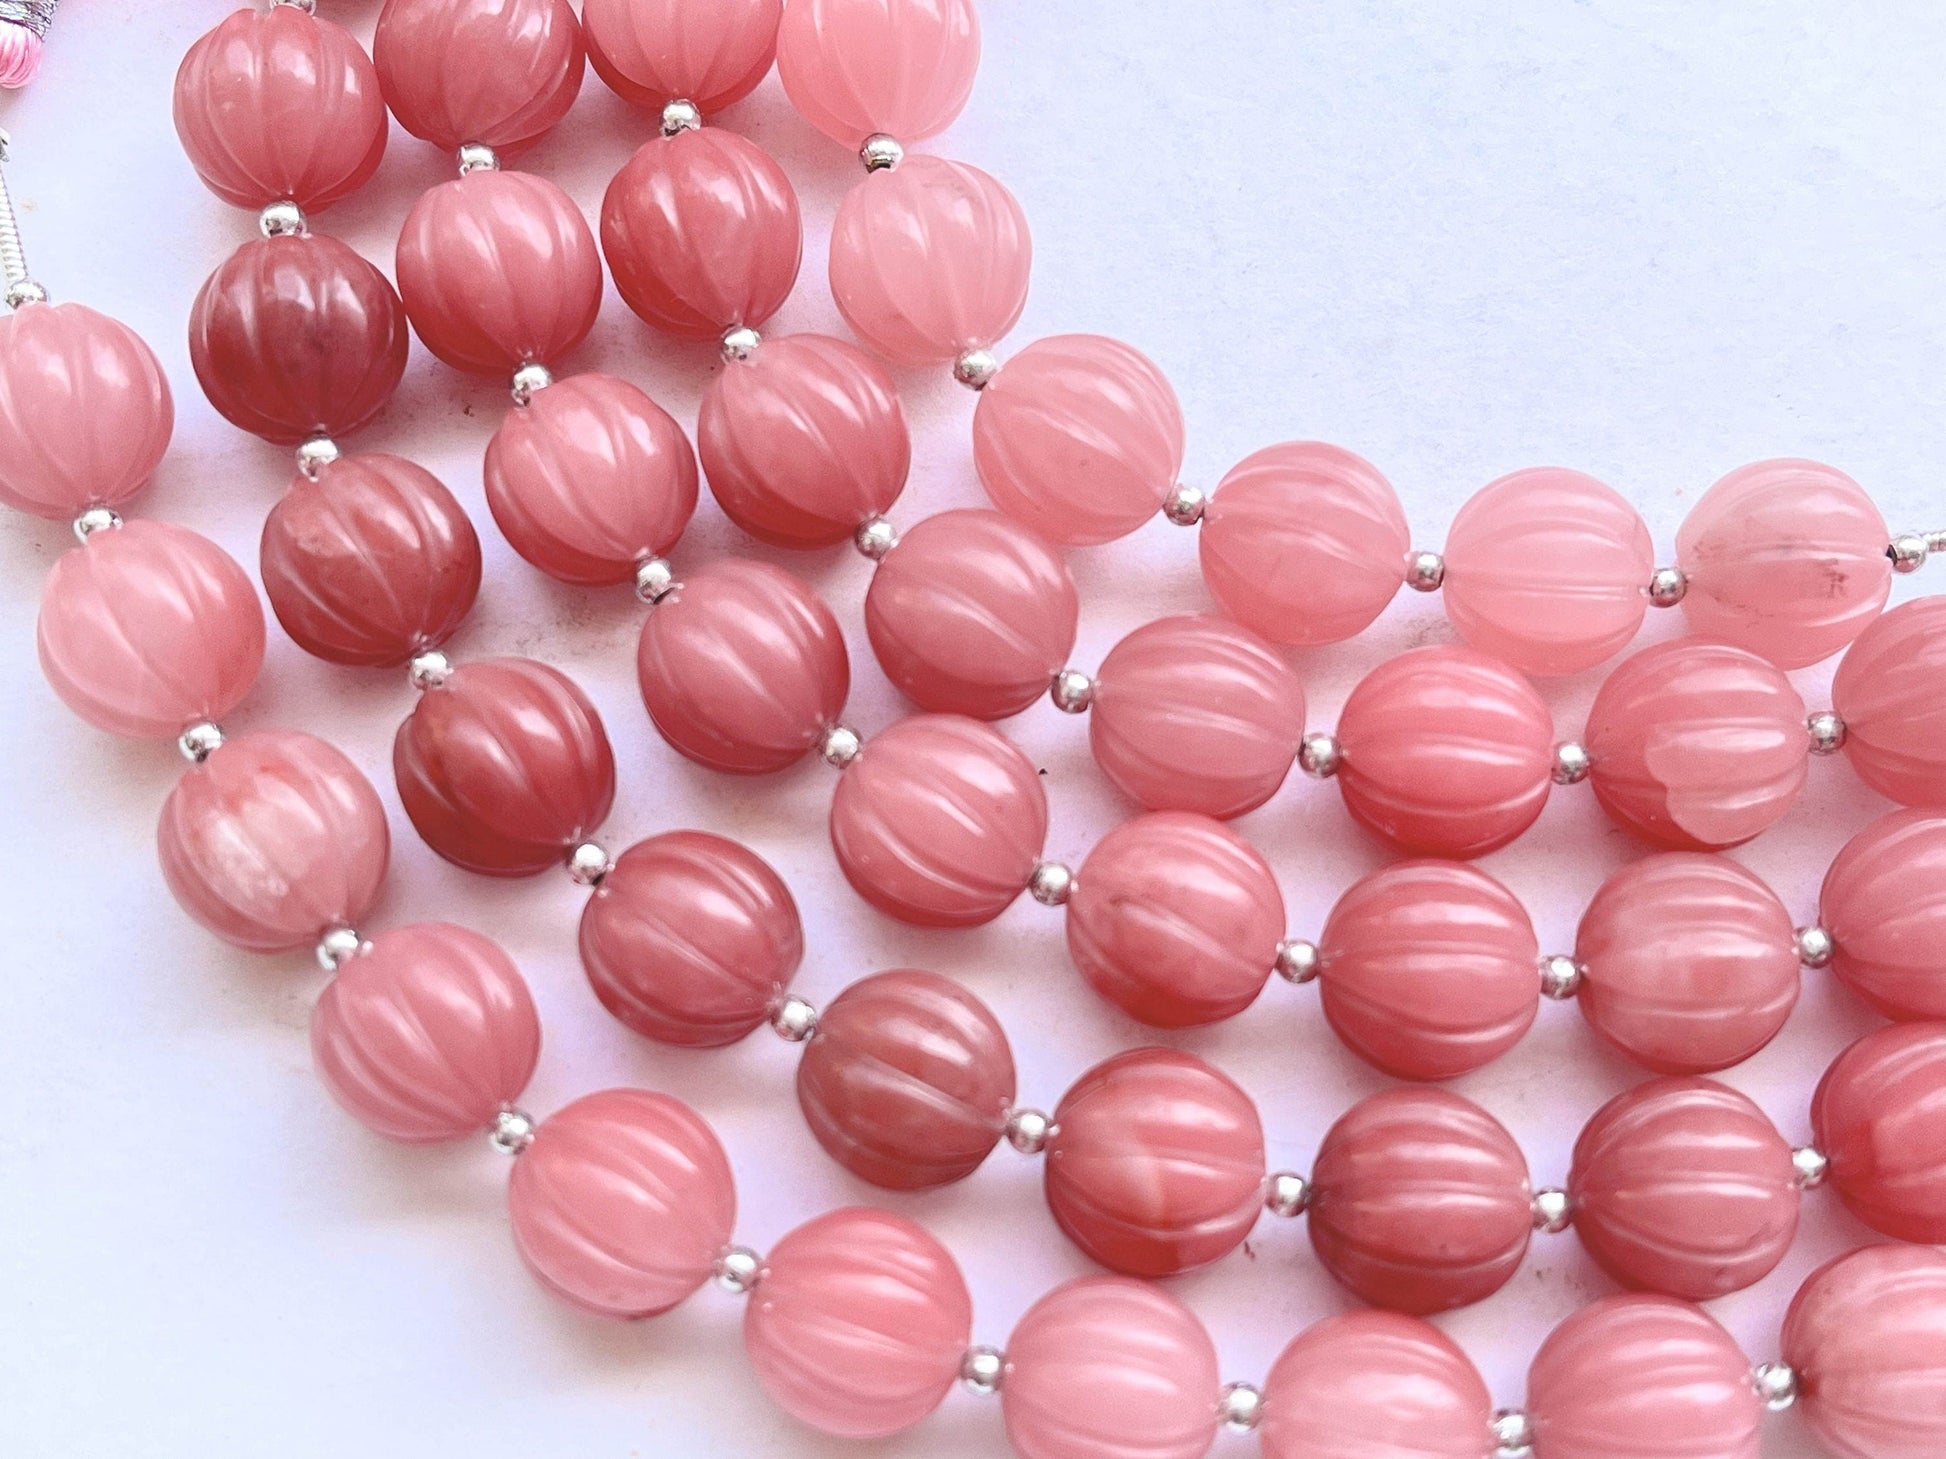 12 Pieces Natural Guava Quartz Carved Sphere shape beads Beadsforyourjewelry